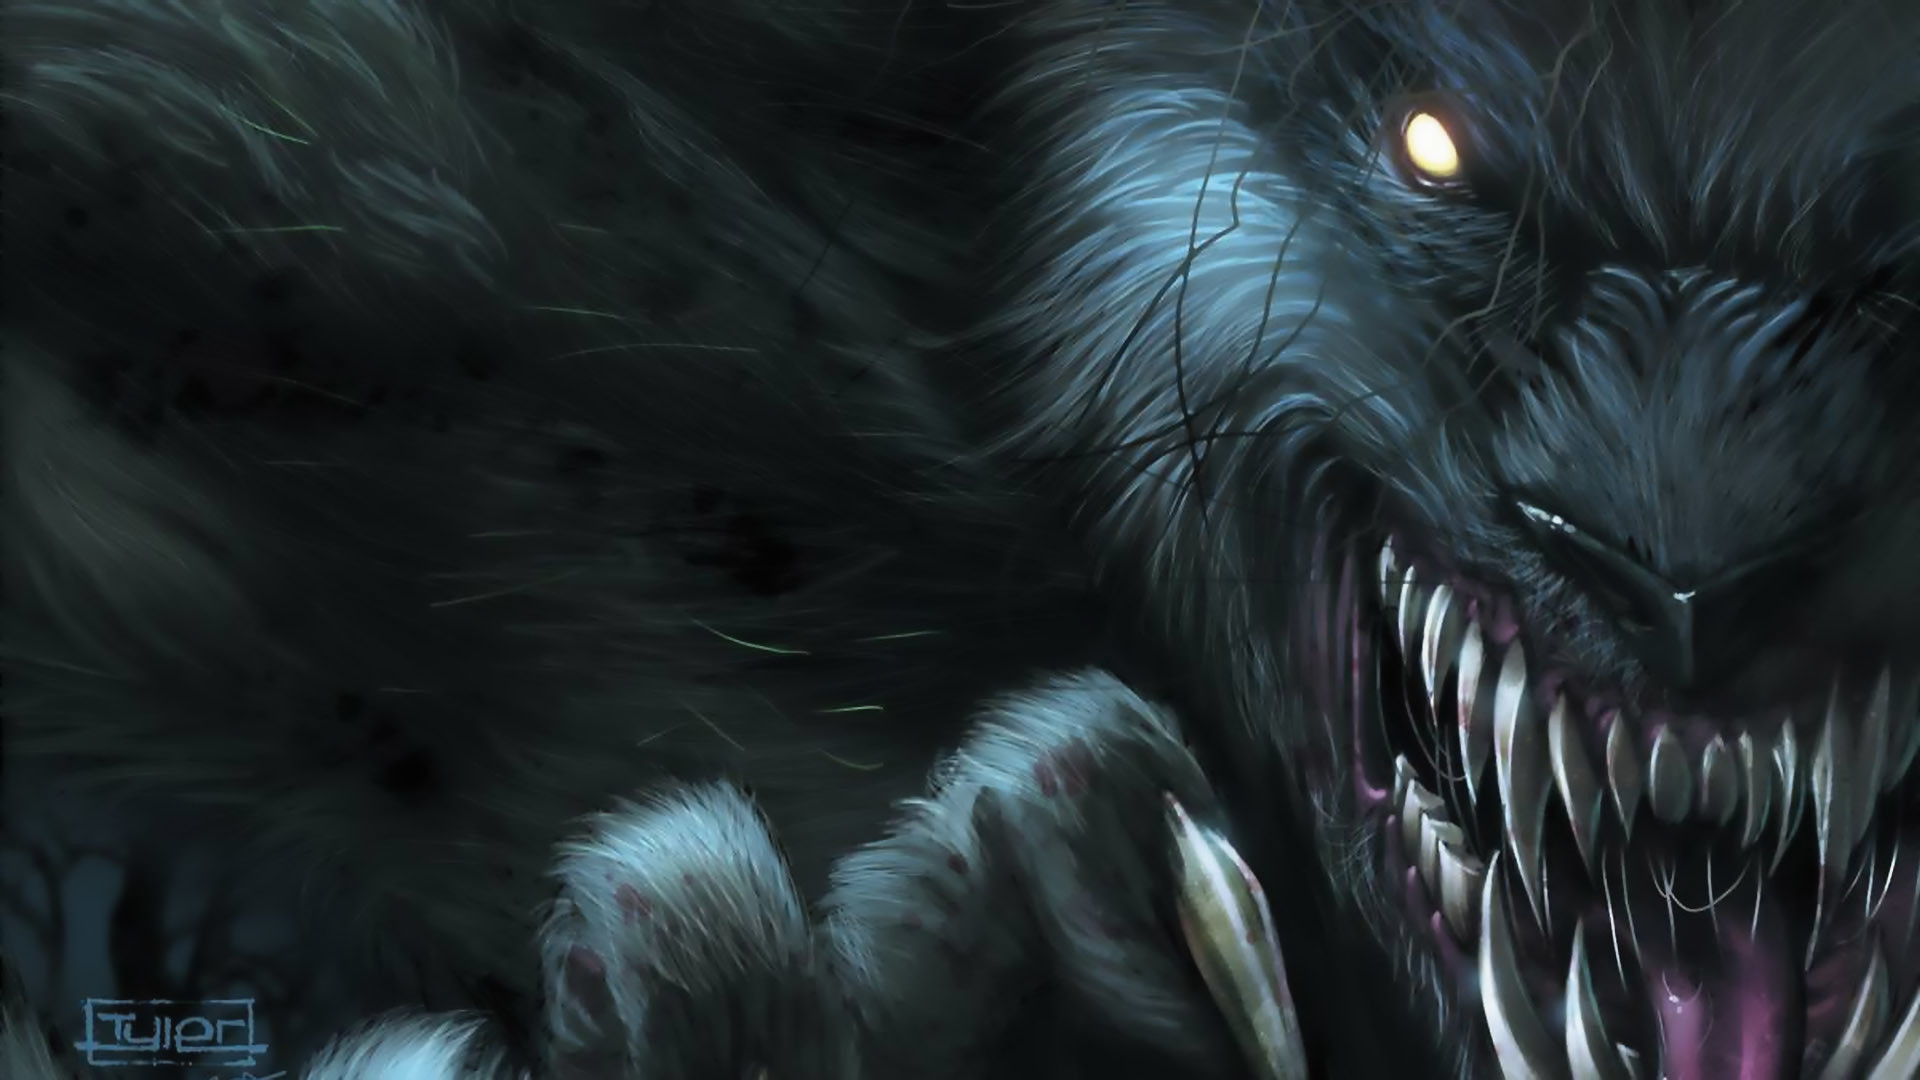 1920x1080 Fairy Tales: Werewolves HD Wallpapers | Backgrounds - Wallpaper Abyss .